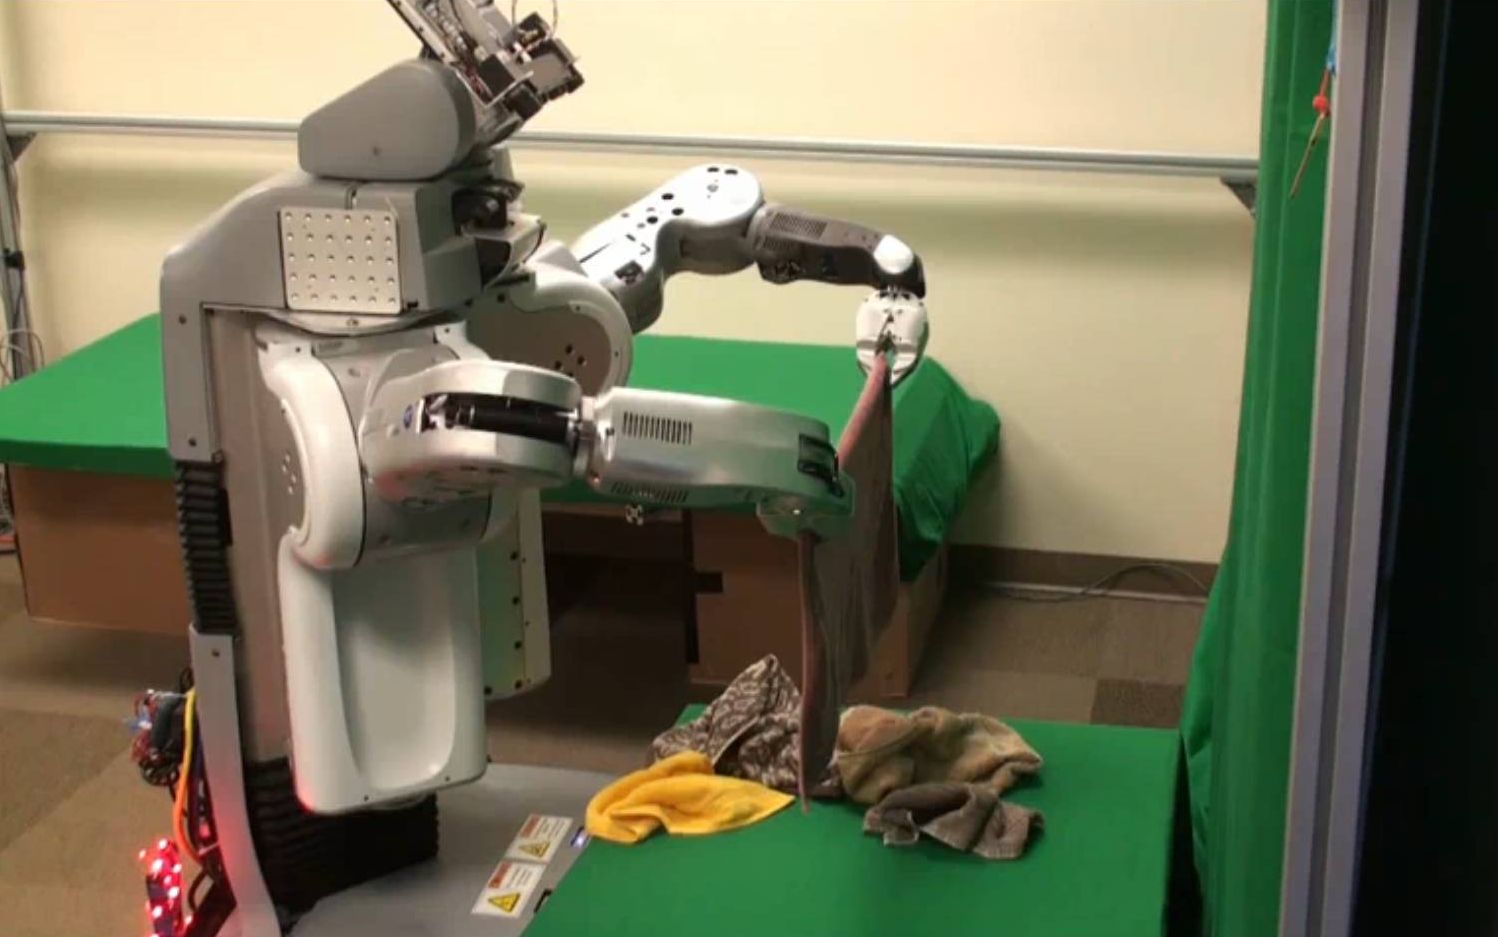 Adorable Laundry-Folding Robot Gives Your Towels Fastidious Attention